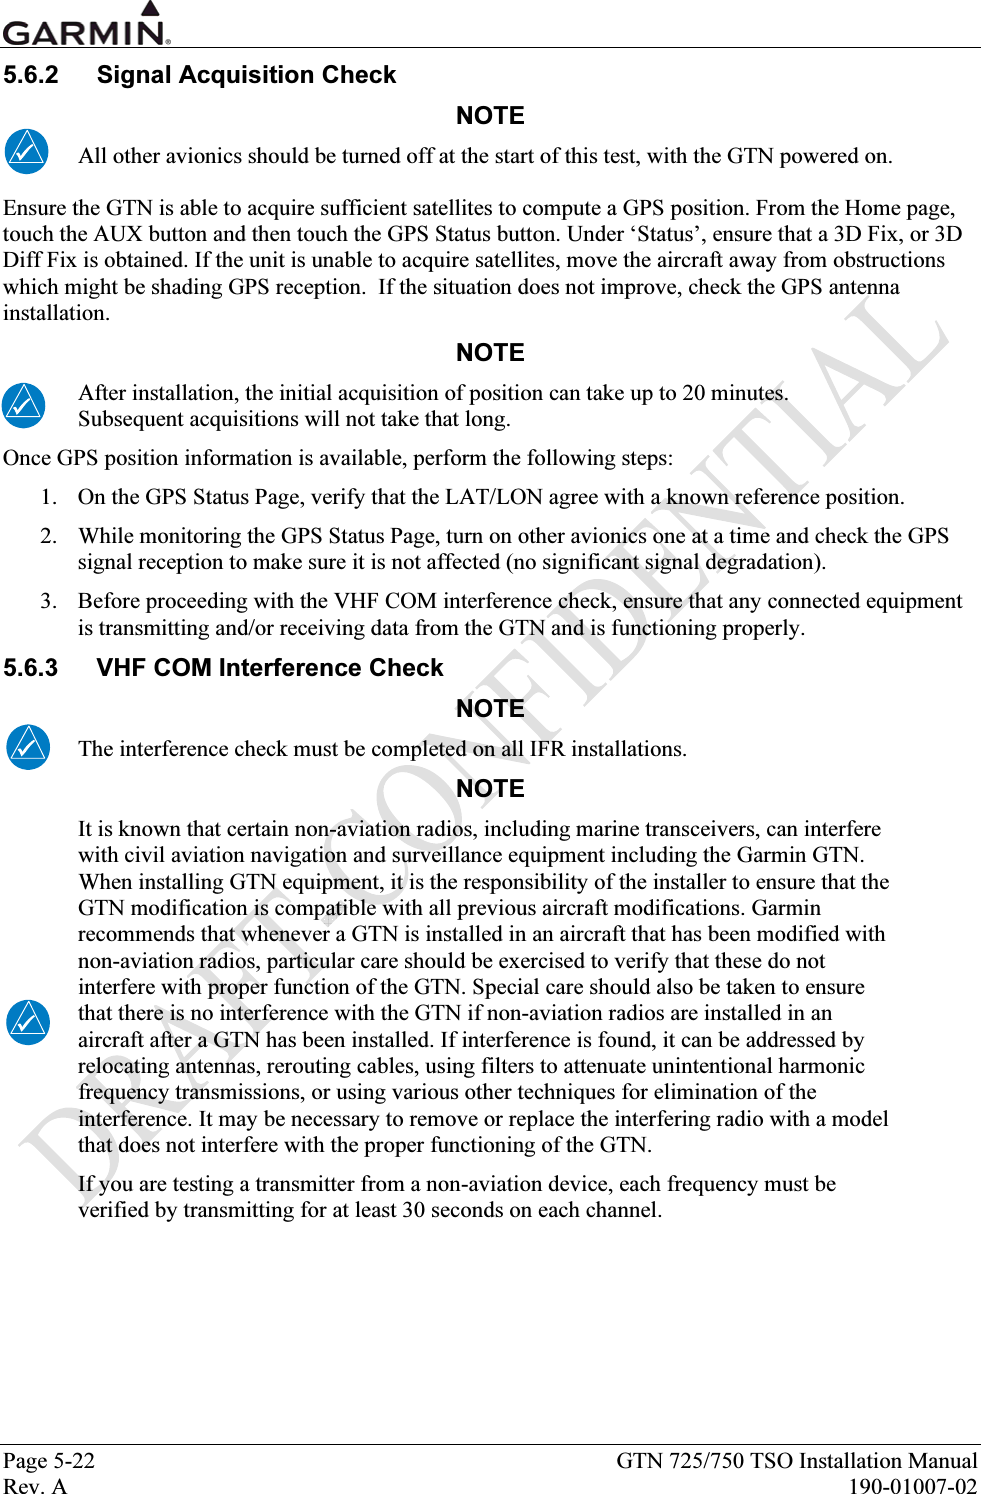  Page 5-22  GTN 725/750 TSO Installation Manual Rev. A  190-01007-02 5.6.2 Signal Acquisition Check NOTE All other avionics should be turned off at the start of this test, with the GTN powered on. Ensure the GTN is able to acquire sufficient satellites to compute a GPS position. From the Home page, touch the AUX button and then touch the GPS Status button. Under ‘Status’, ensure that a 3D Fix, or 3D Diff Fix is obtained. If the unit is unable to acquire satellites, move the aircraft away from obstructions which might be shading GPS reception.  If the situation does not improve, check the GPS antenna installation. NOTE After installation, the initial acquisition of position can take up to 20 minutes.  Subsequent acquisitions will not take that long. Once GPS position information is available, perform the following steps: 1. On the GPS Status Page, verify that the LAT/LON agree with a known reference position. 2. While monitoring the GPS Status Page, turn on other avionics one at a time and check the GPS signal reception to make sure it is not affected (no significant signal degradation).  3. Before proceeding with the VHF COM interference check, ensure that any connected equipment is transmitting and/or receiving data from the GTN and is functioning properly. 5.6.3  VHF COM Interference Check NOTE The interference check must be completed on all IFR installations. NOTE It is known that certain non-aviation radios, including marine transceivers, can interfere with civil aviation navigation and surveillance equipment including the Garmin GTN. When installing GTN equipment, it is the responsibility of the installer to ensure that the GTN modification is compatible with all previous aircraft modifications. Garmin recommends that whenever a GTN is installed in an aircraft that has been modified with non-aviation radios, particular care should be exercised to verify that these do not interfere with proper function of the GTN. Special care should also be taken to ensure that there is no interference with the GTN if non-aviation radios are installed in an aircraft after a GTN has been installed. If interference is found, it can be addressed by relocating antennas, rerouting cables, using filters to attenuate unintentional harmonic frequency transmissions, or using various other techniques for elimination of the interference. It may be necessary to remove or replace the interfering radio with a model that does not interfere with the proper functioning of the GTN. If you are testing a transmitter from a non-aviation device, each frequency must be verified by transmitting for at least 30 seconds on each channel. 